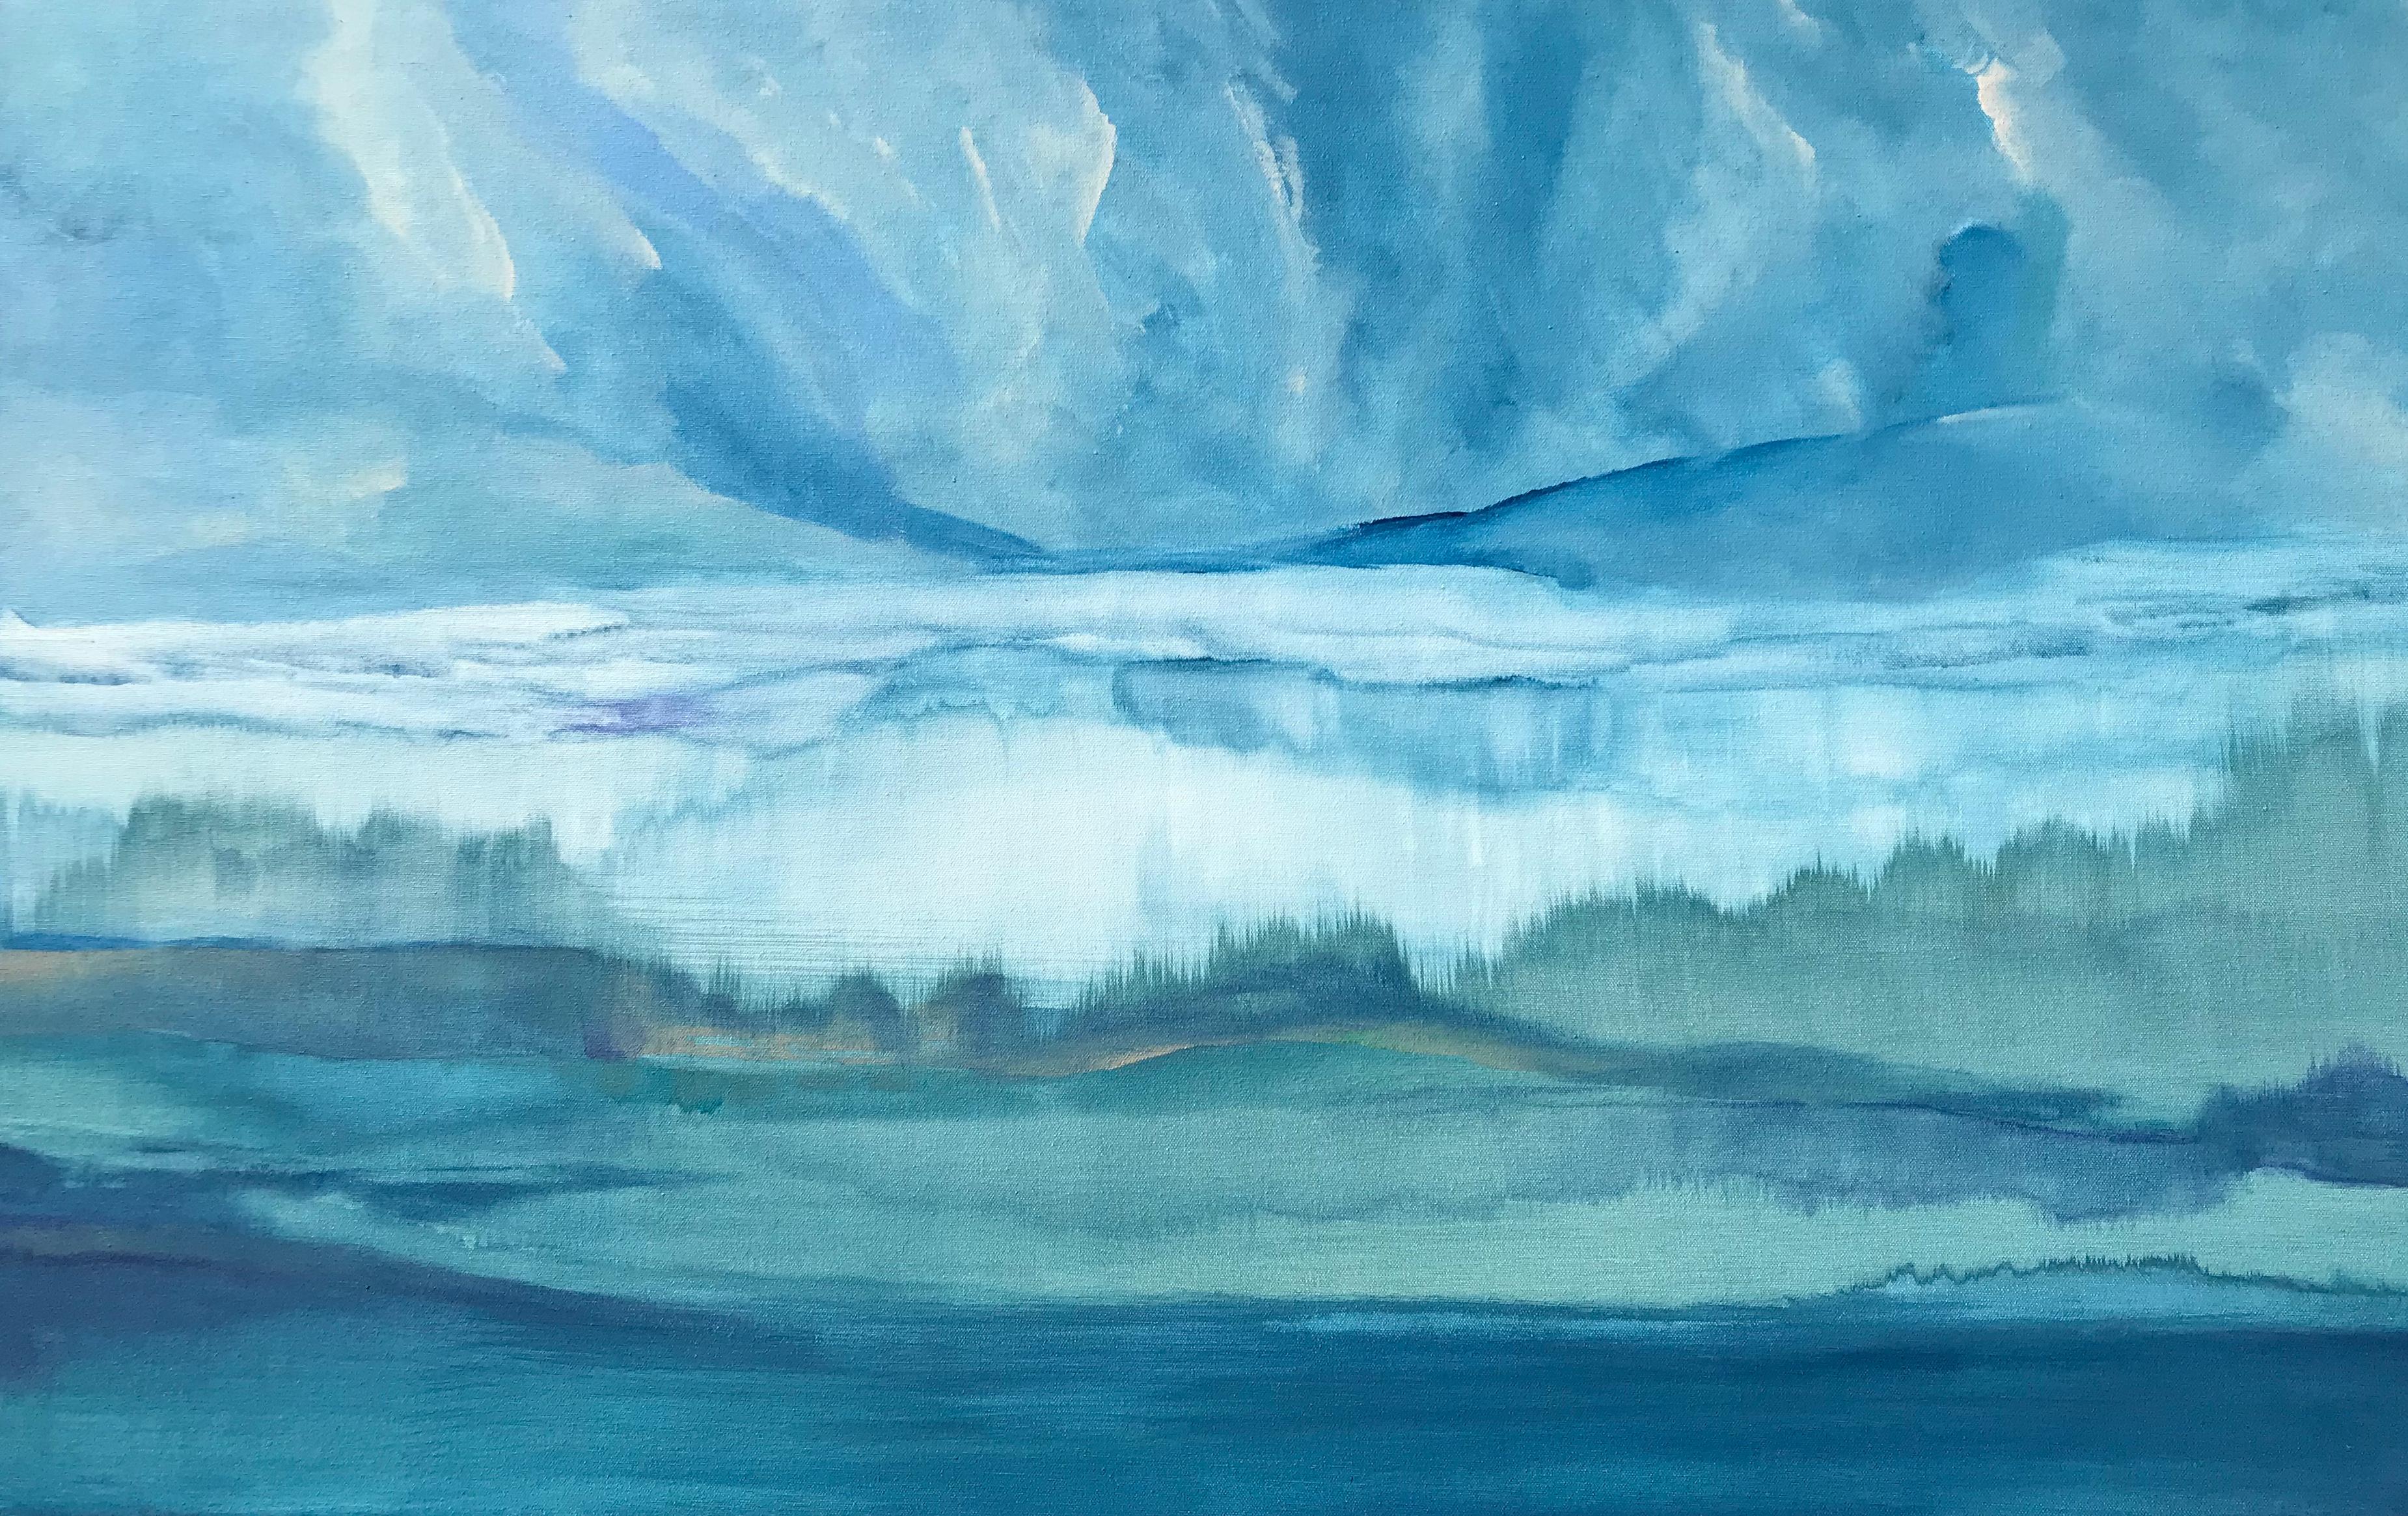 <p>Artist Comments<br />A cool, misty abstract landscape, hinting at trees, rolling hills and a cloudy sky overhead. Layers of blues and green wash across the canvas to set the mood. Alicia describes this scene as being from a dream. She draws from